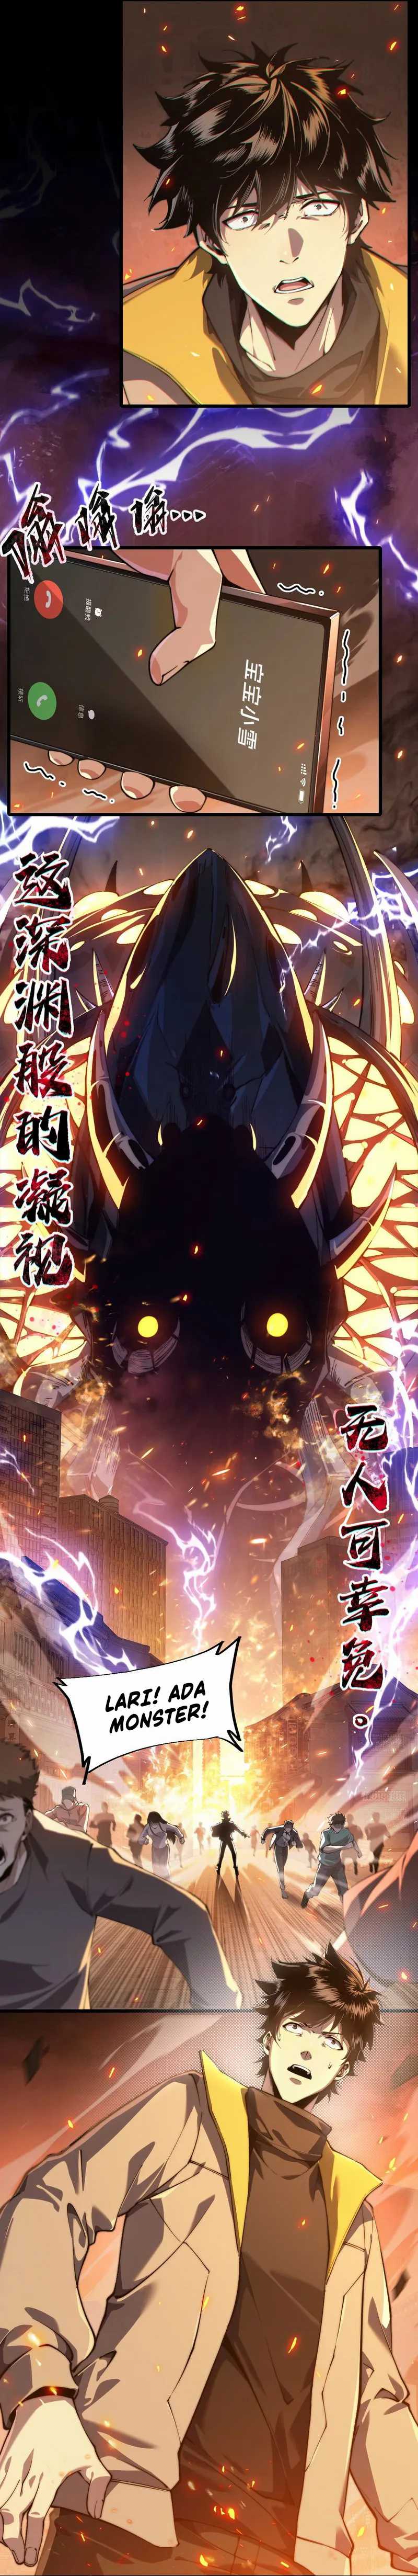 Evolution from Carp to Divine Dragon Chapter 01